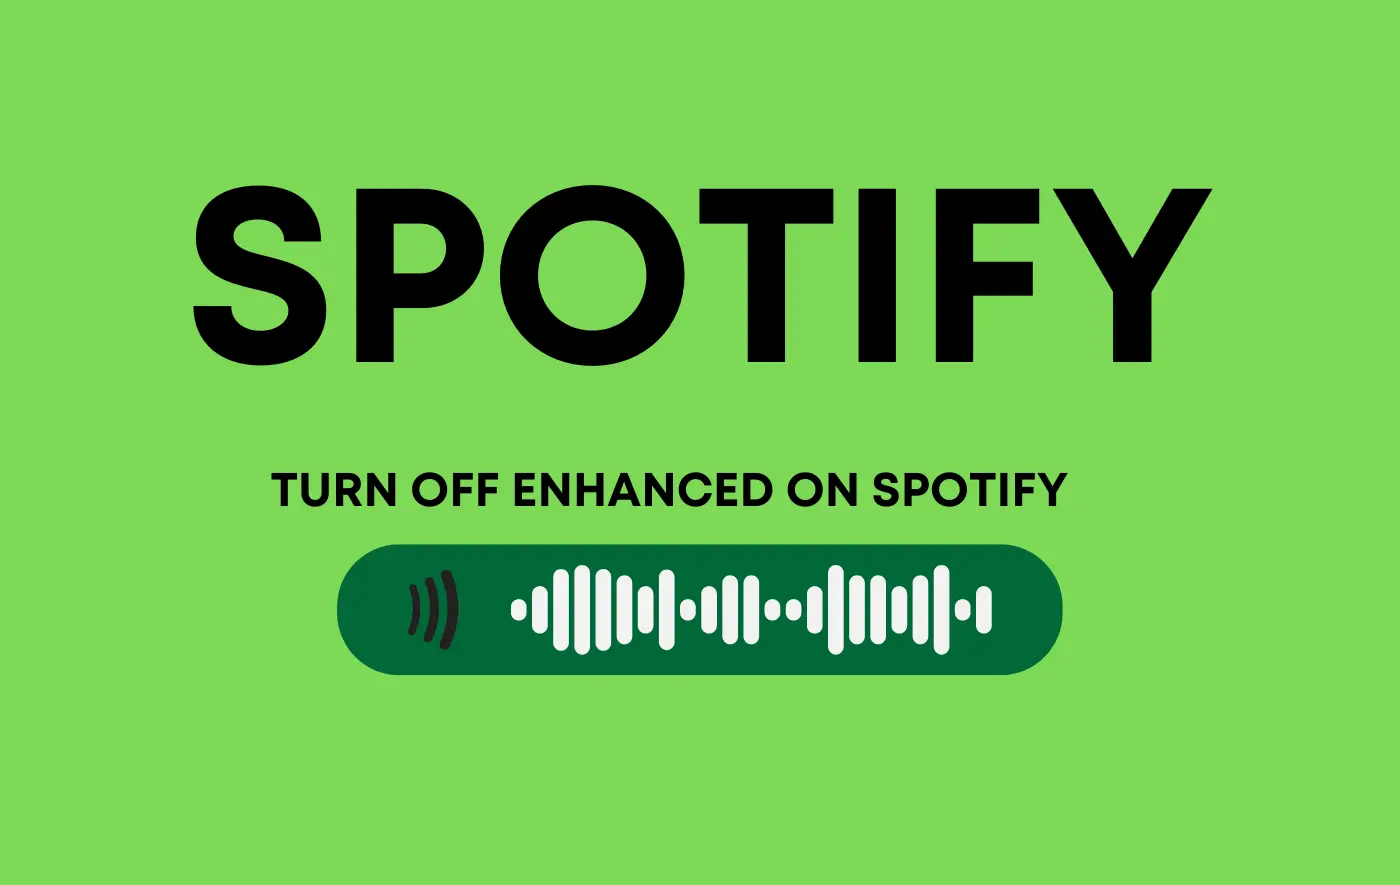 How to Turn Off Enhanced on Spotify